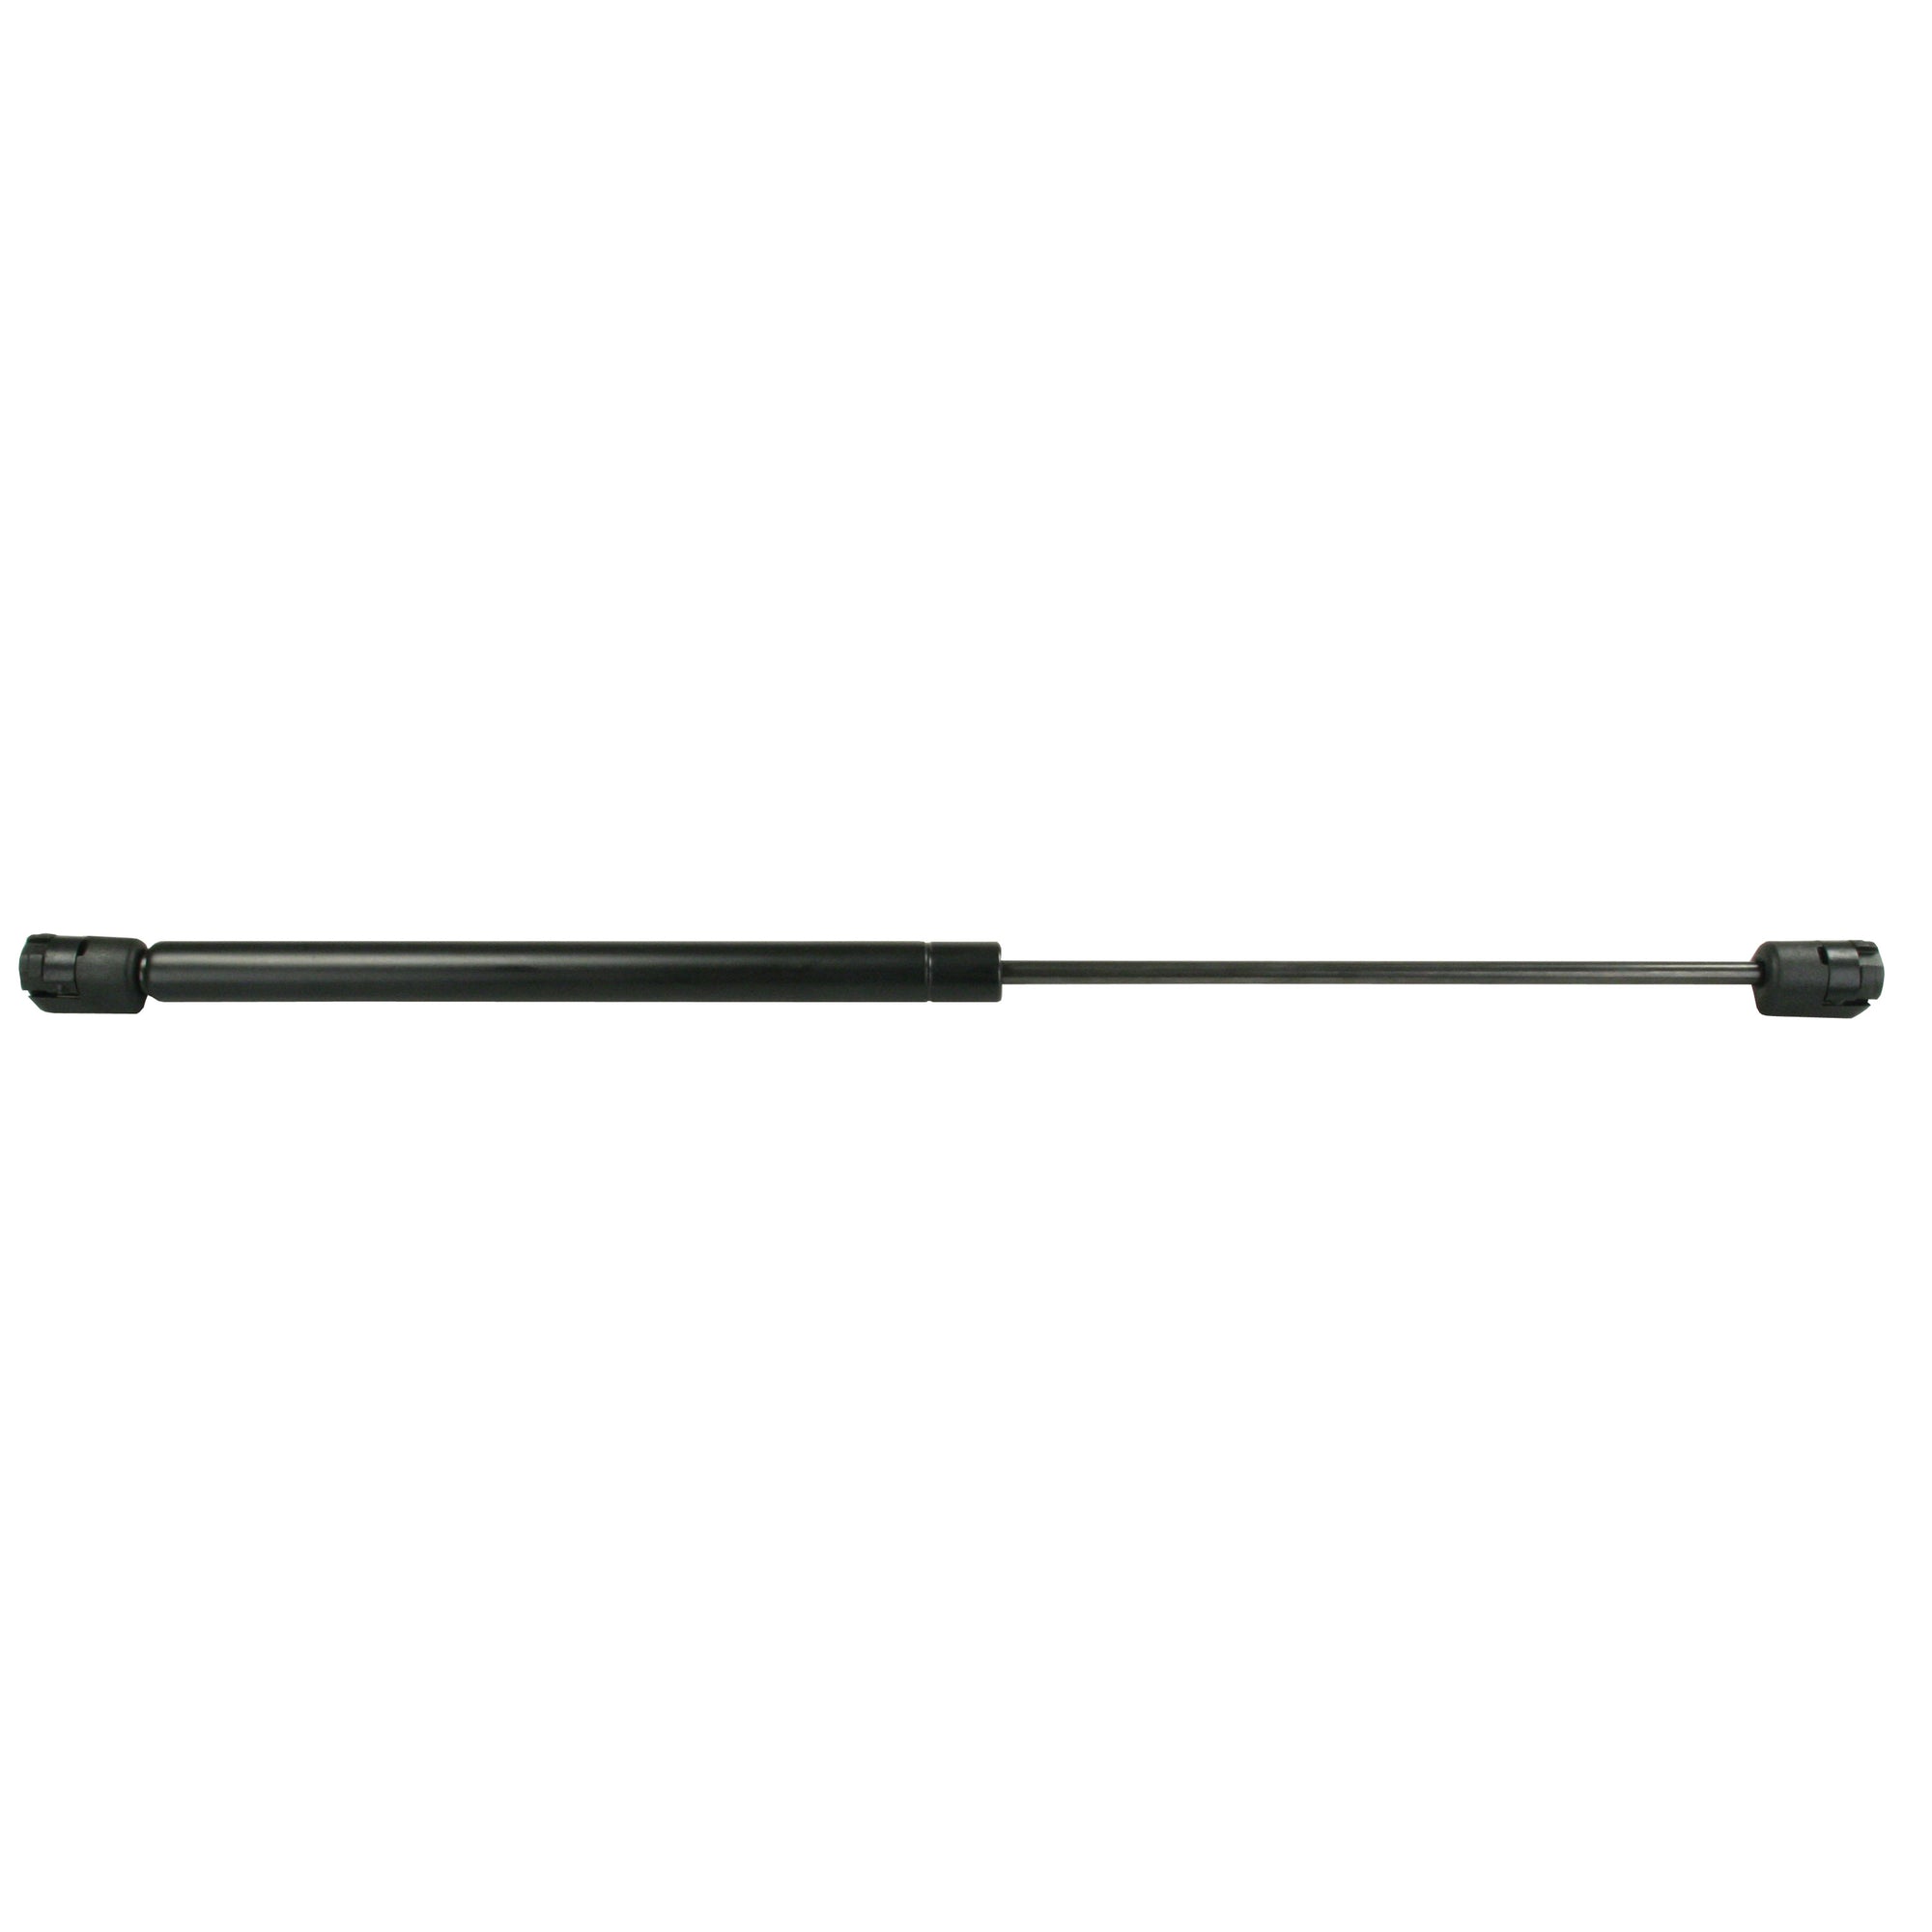 JR Products GSNI-2125-90 Gas Spring - 15" EXT, 90 lbs.